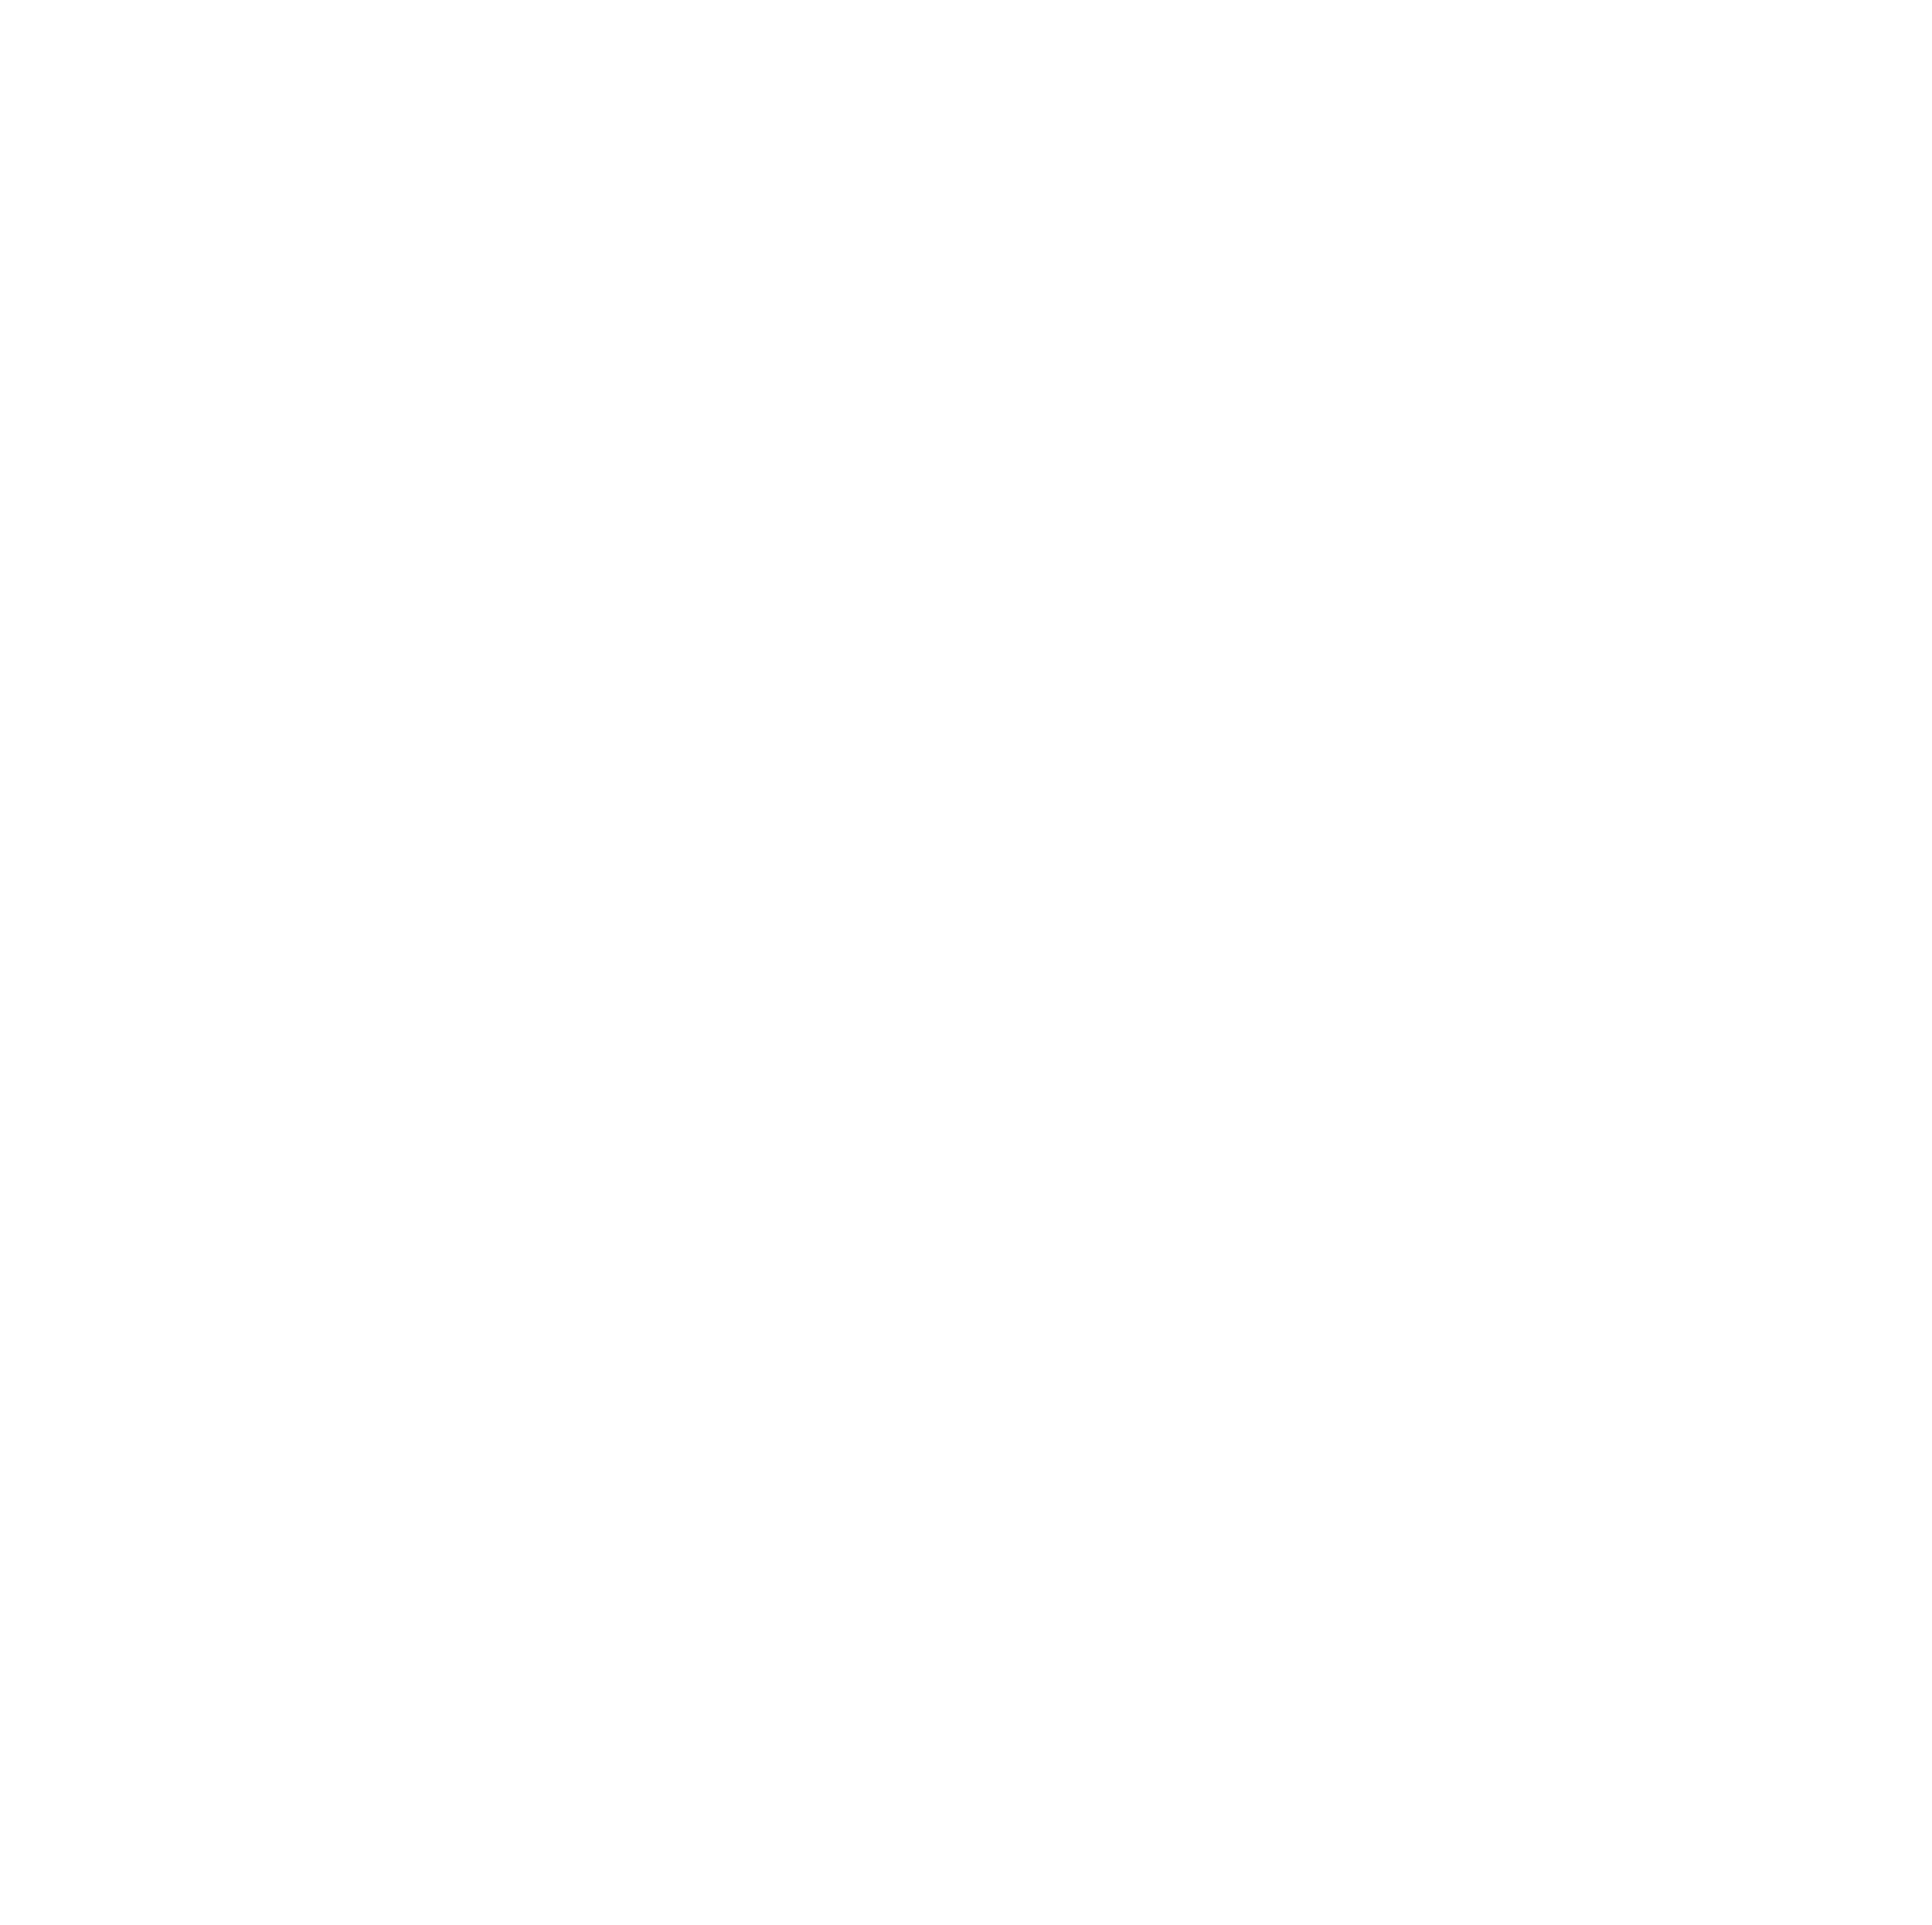 The DRI Blog, Court and Counsel, logo white